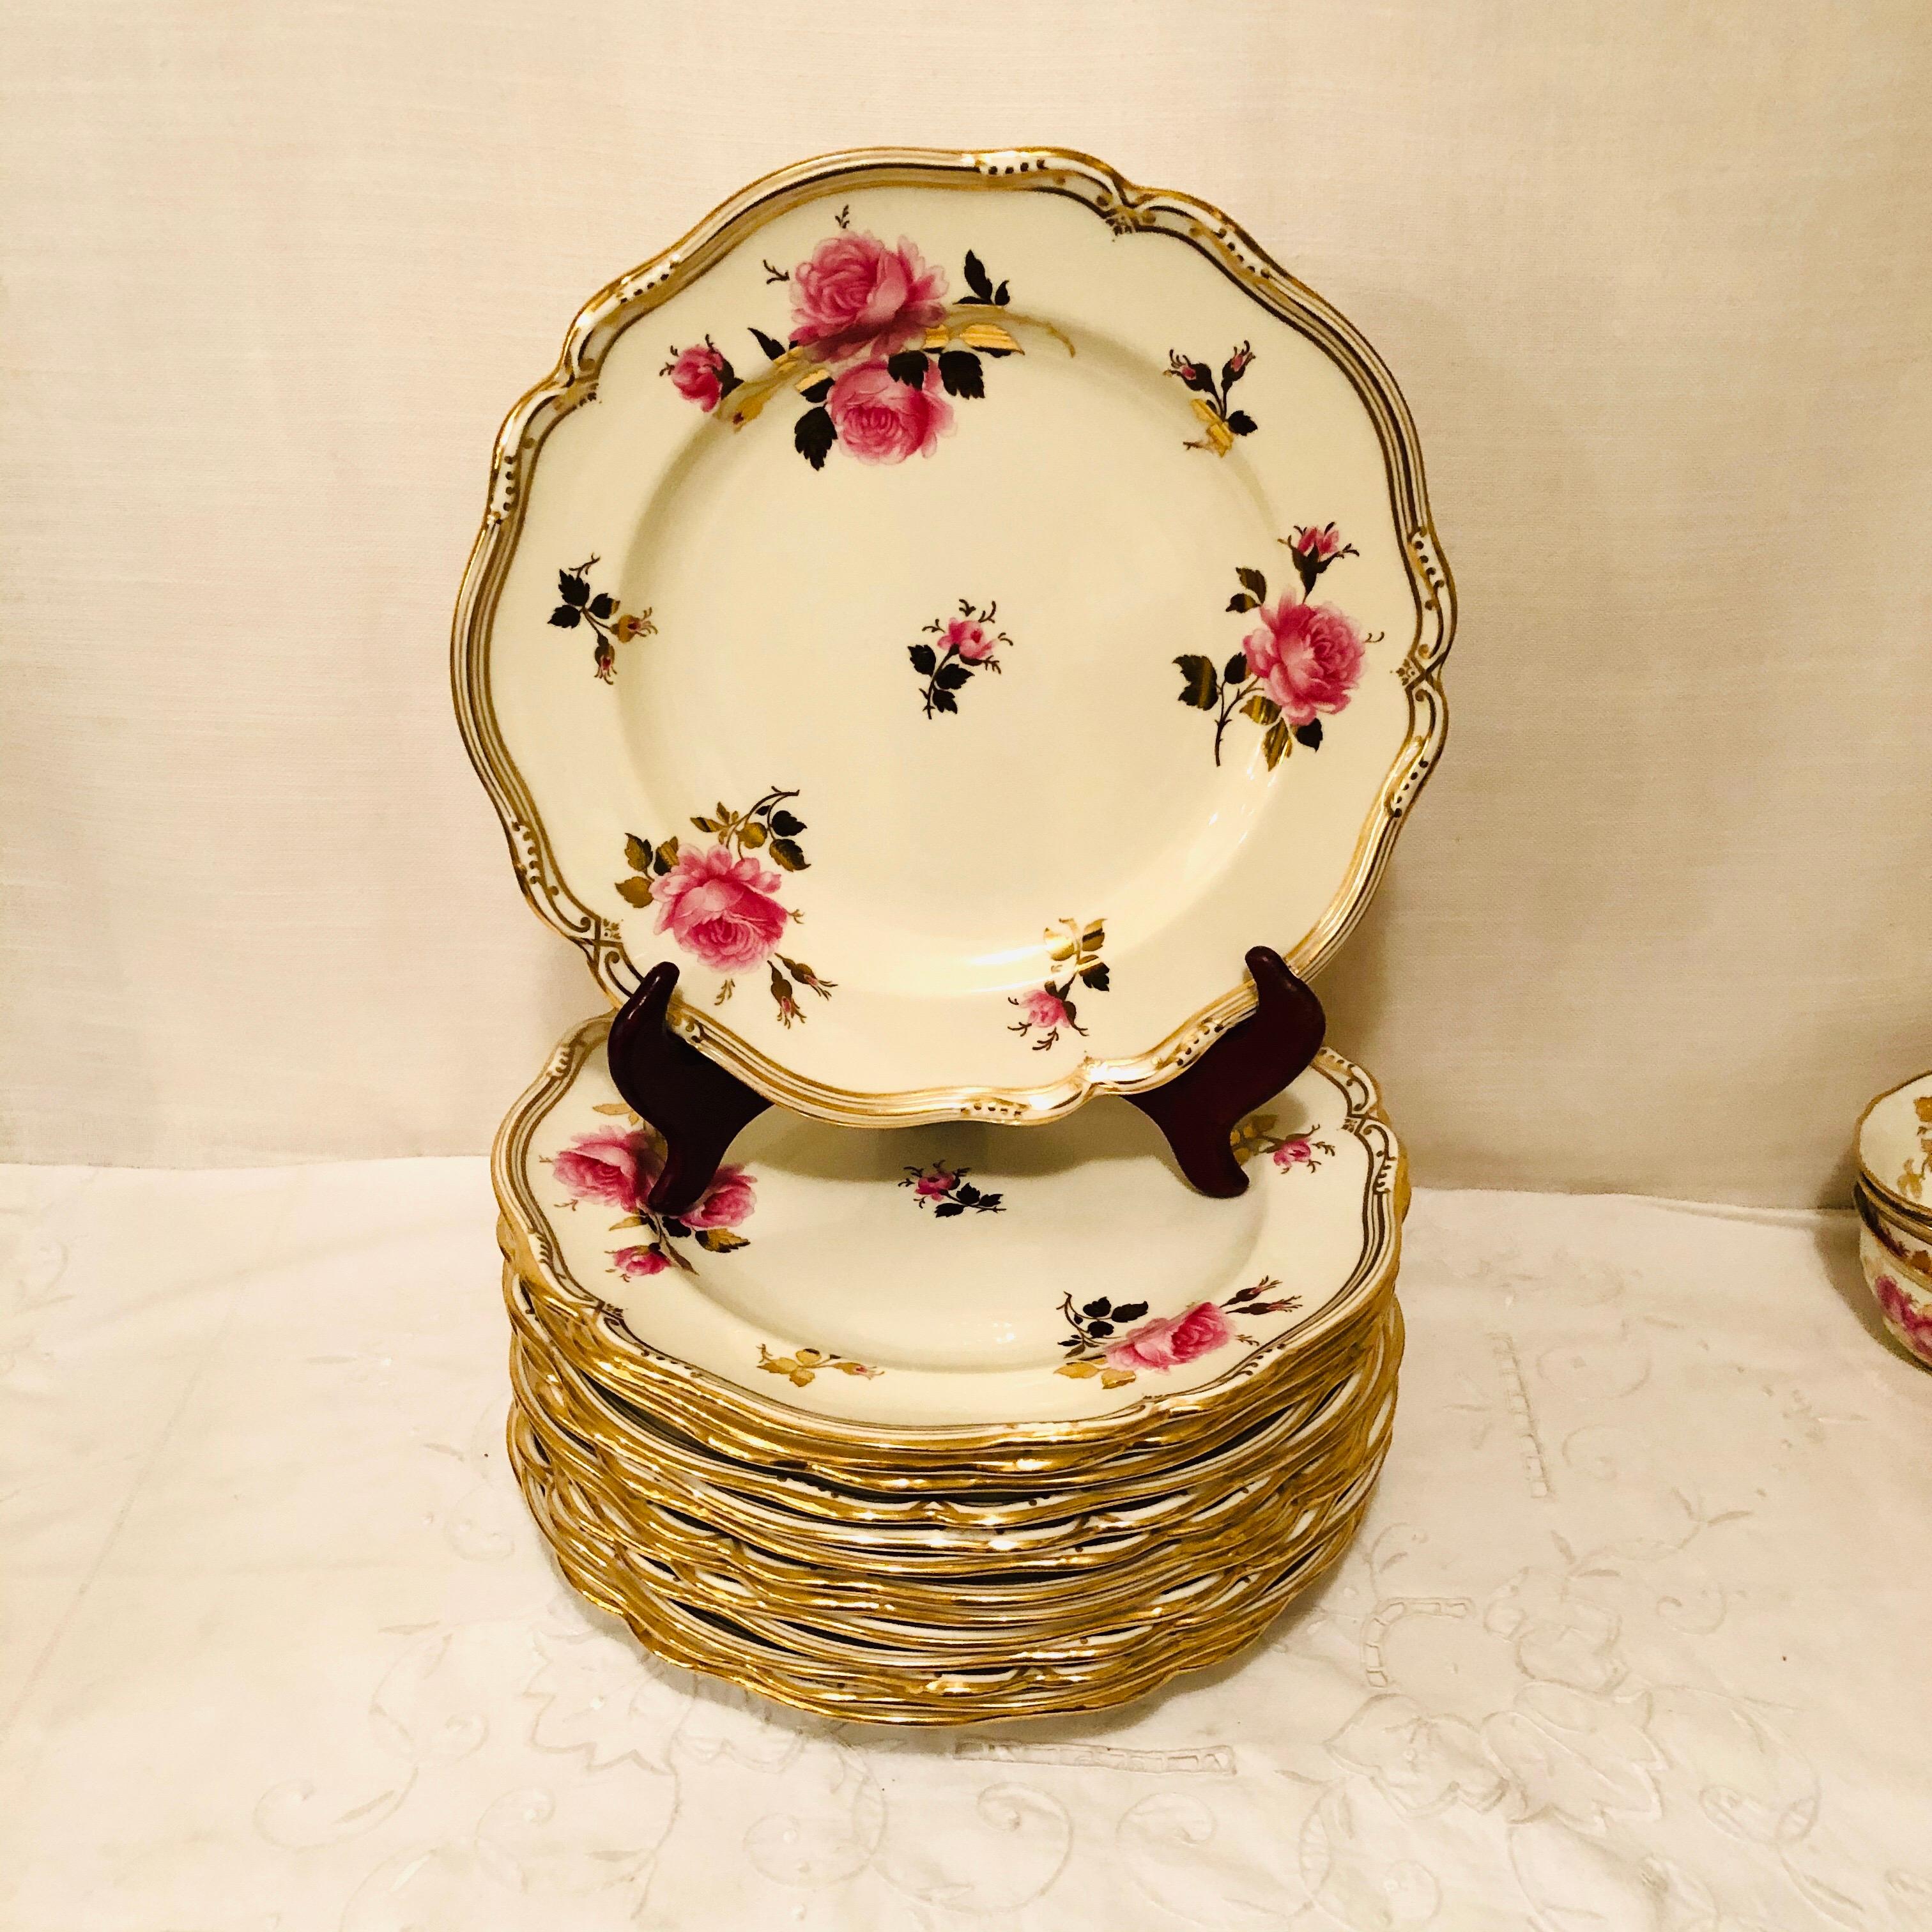 Hand-Painted Spode Made for Tiffany 68 Piece Dinner Service Decorated with Large Pink Roses